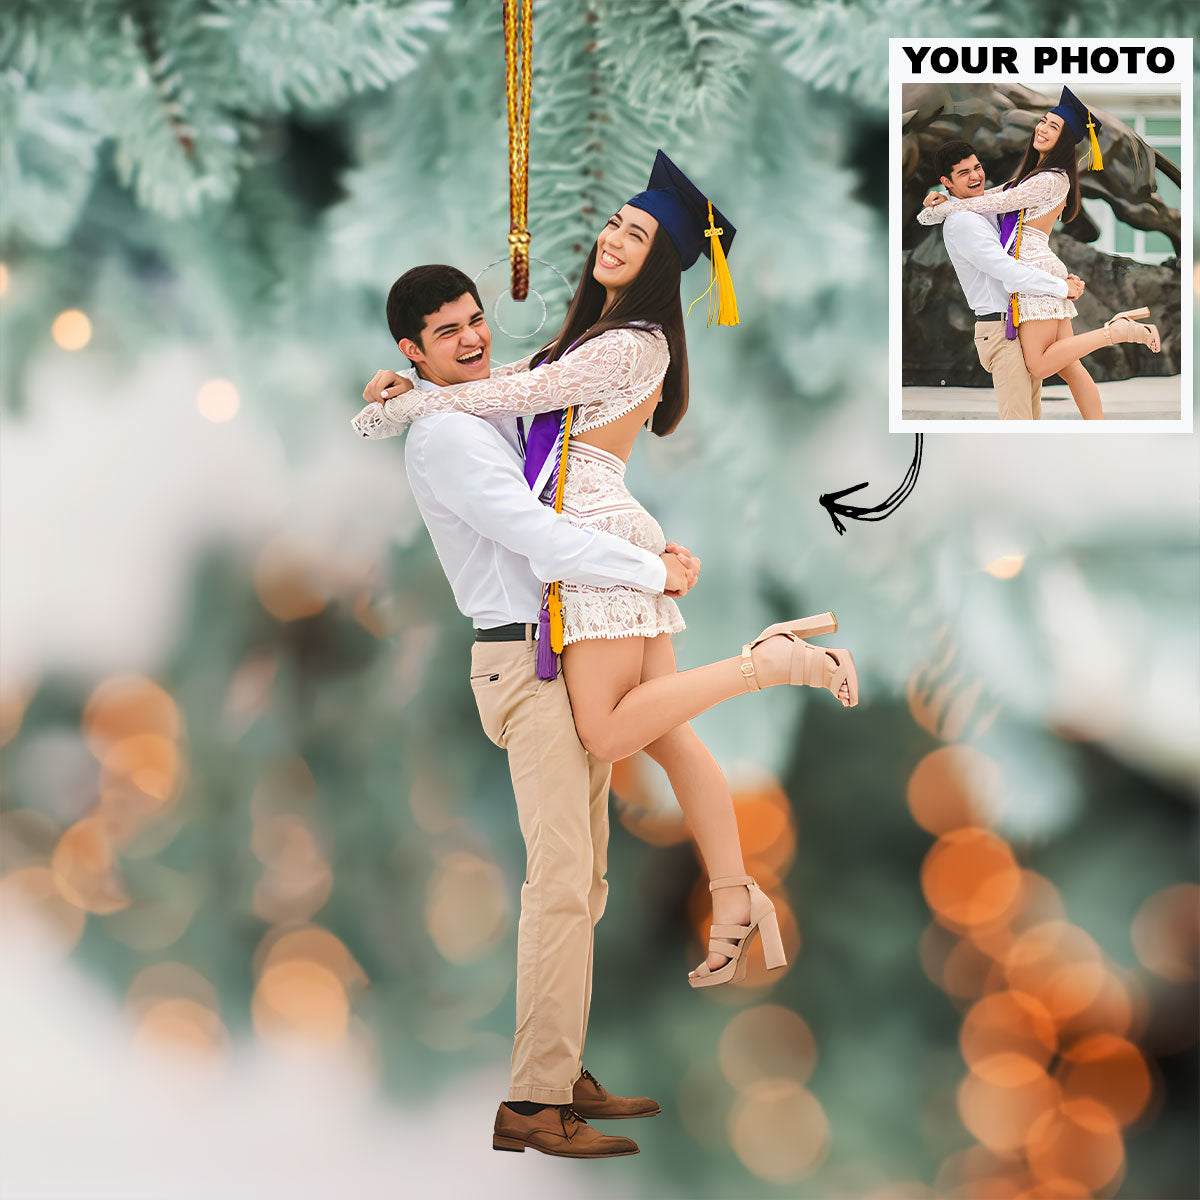 Couple Graduation - Personalized Custom Photo Mica Ornament - Christmas Gift For Couple, Graduation Couple, Family, Family Members